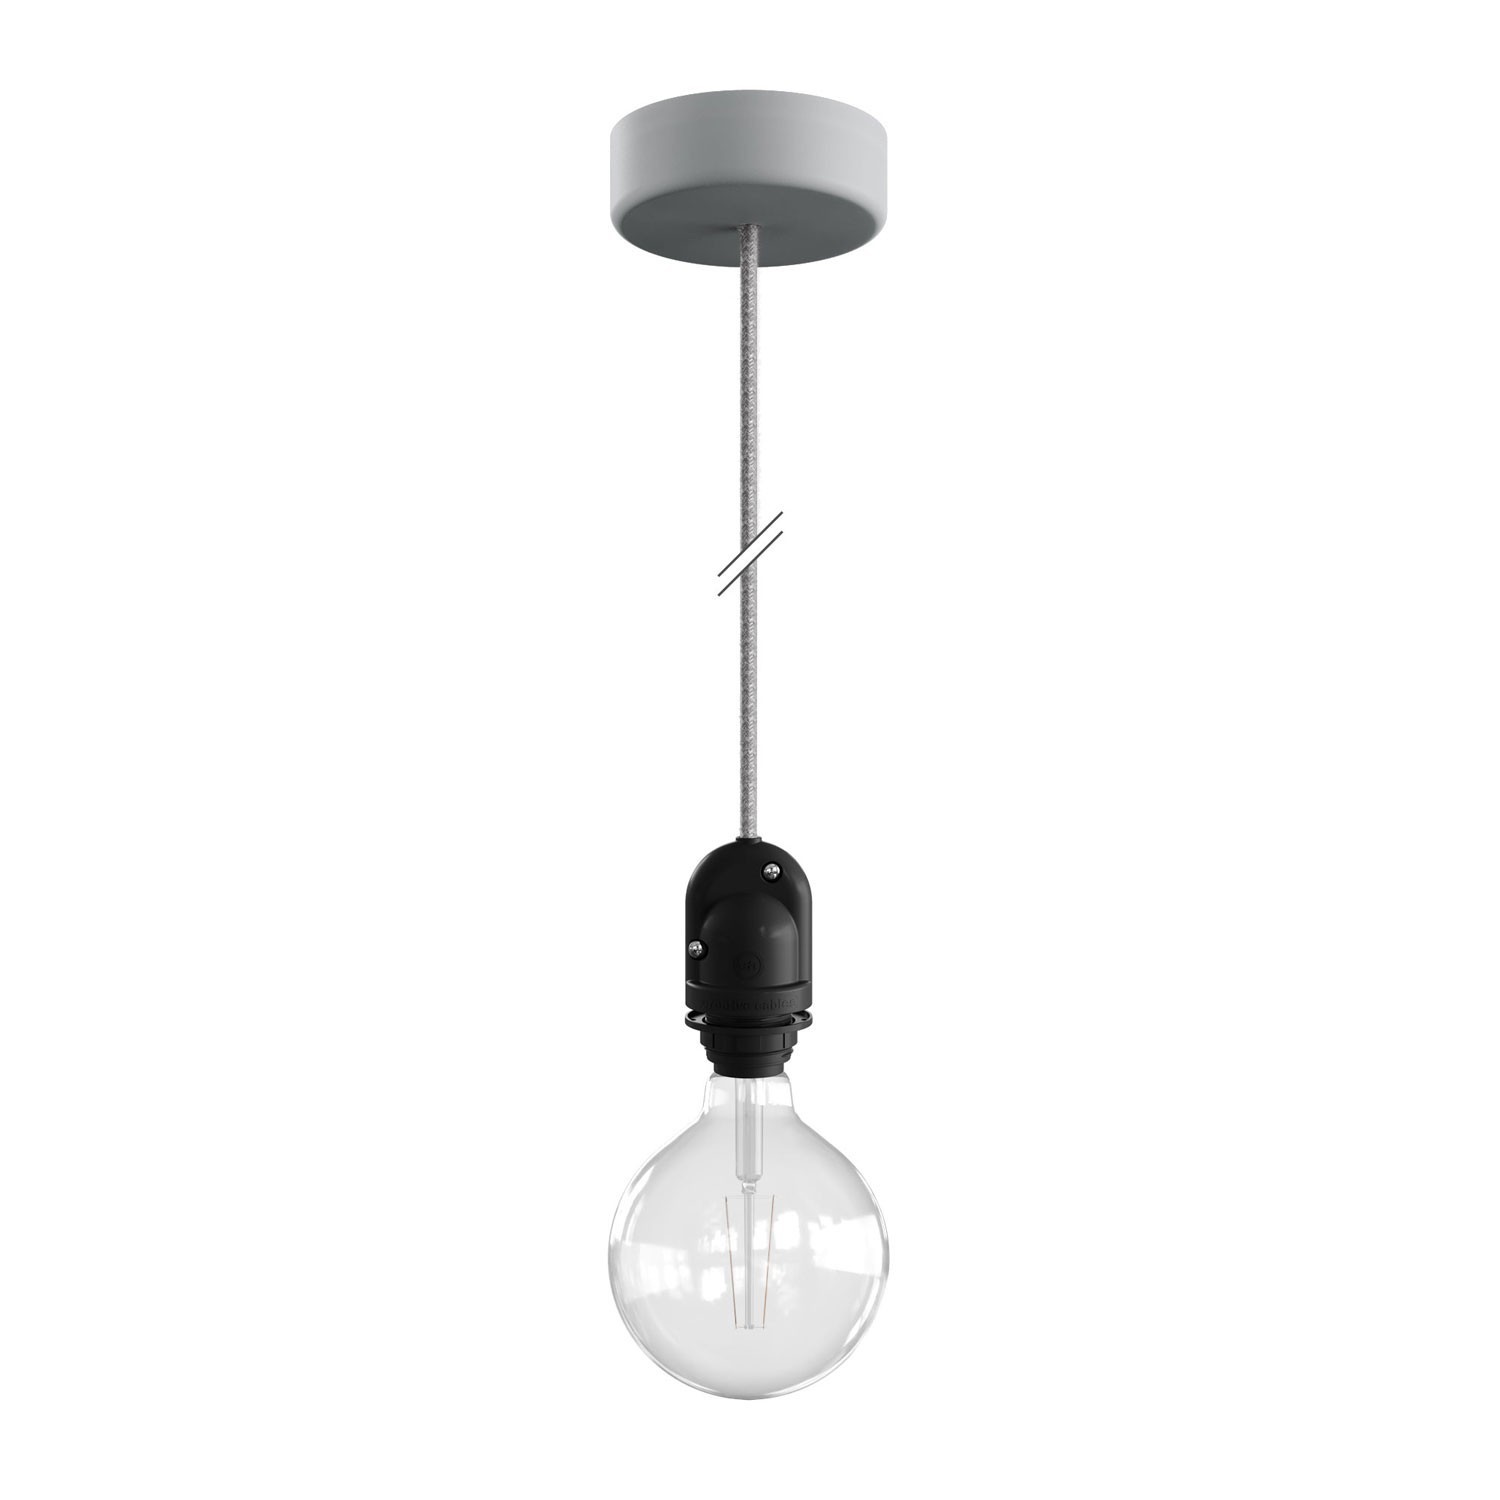 EIVA Outdoor pendant lamp for lampshades with 1,5 mt textile cable, silicone ceiling rose and lamp holder IP65 water resistant